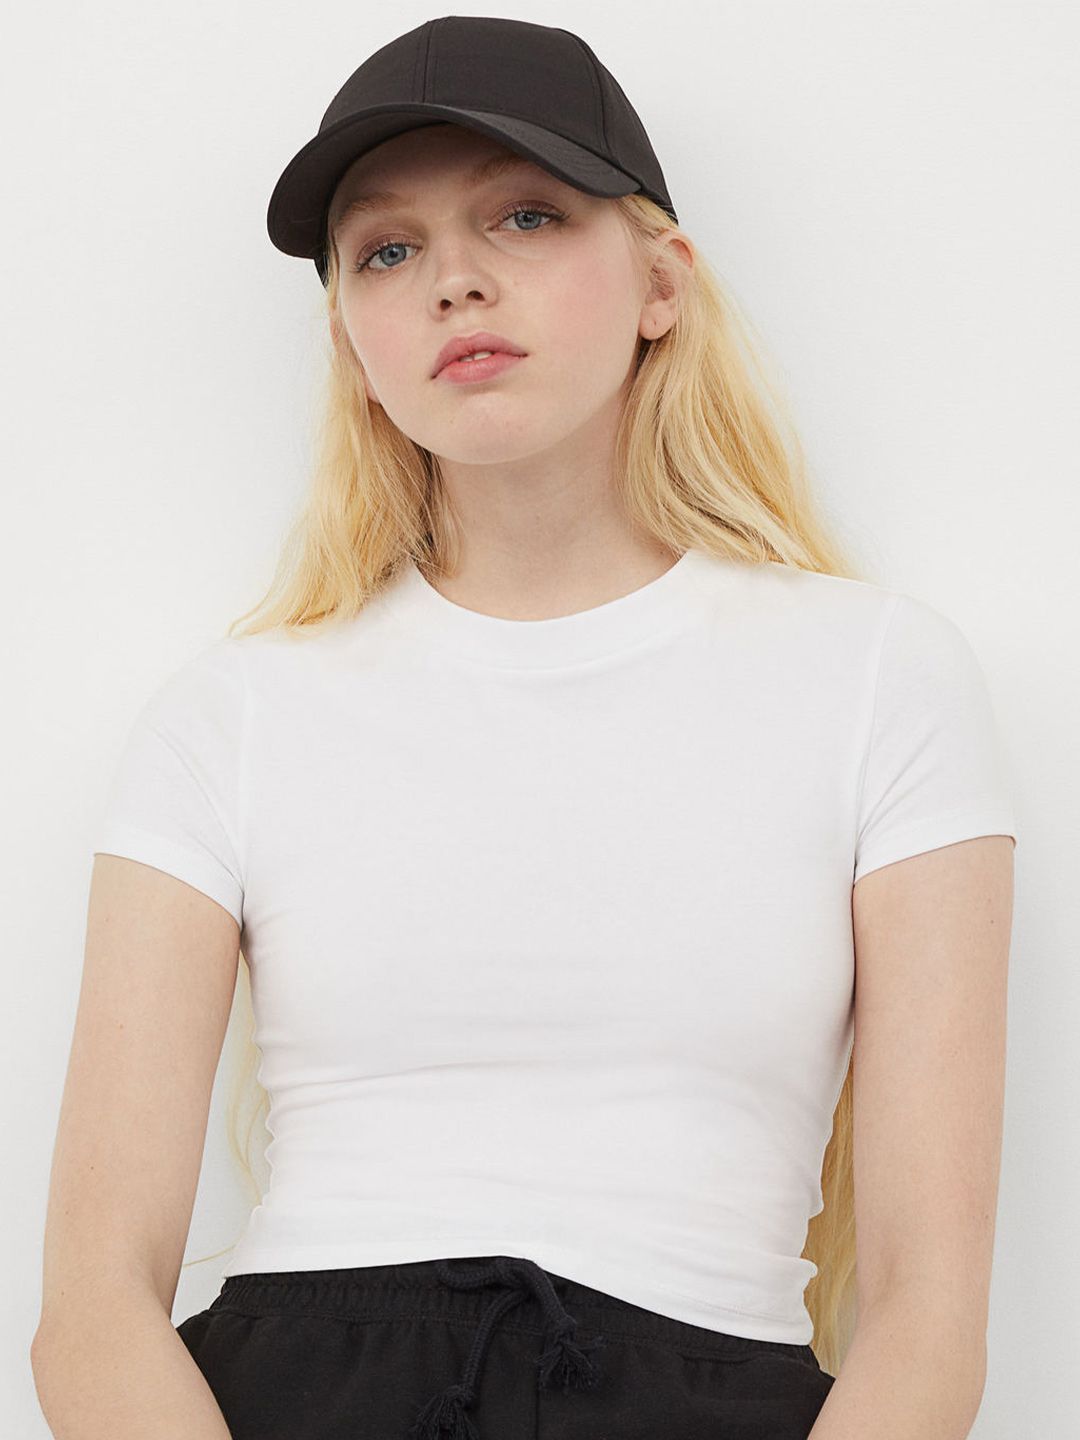 H&M Women White Solid Cropped Top Price in India